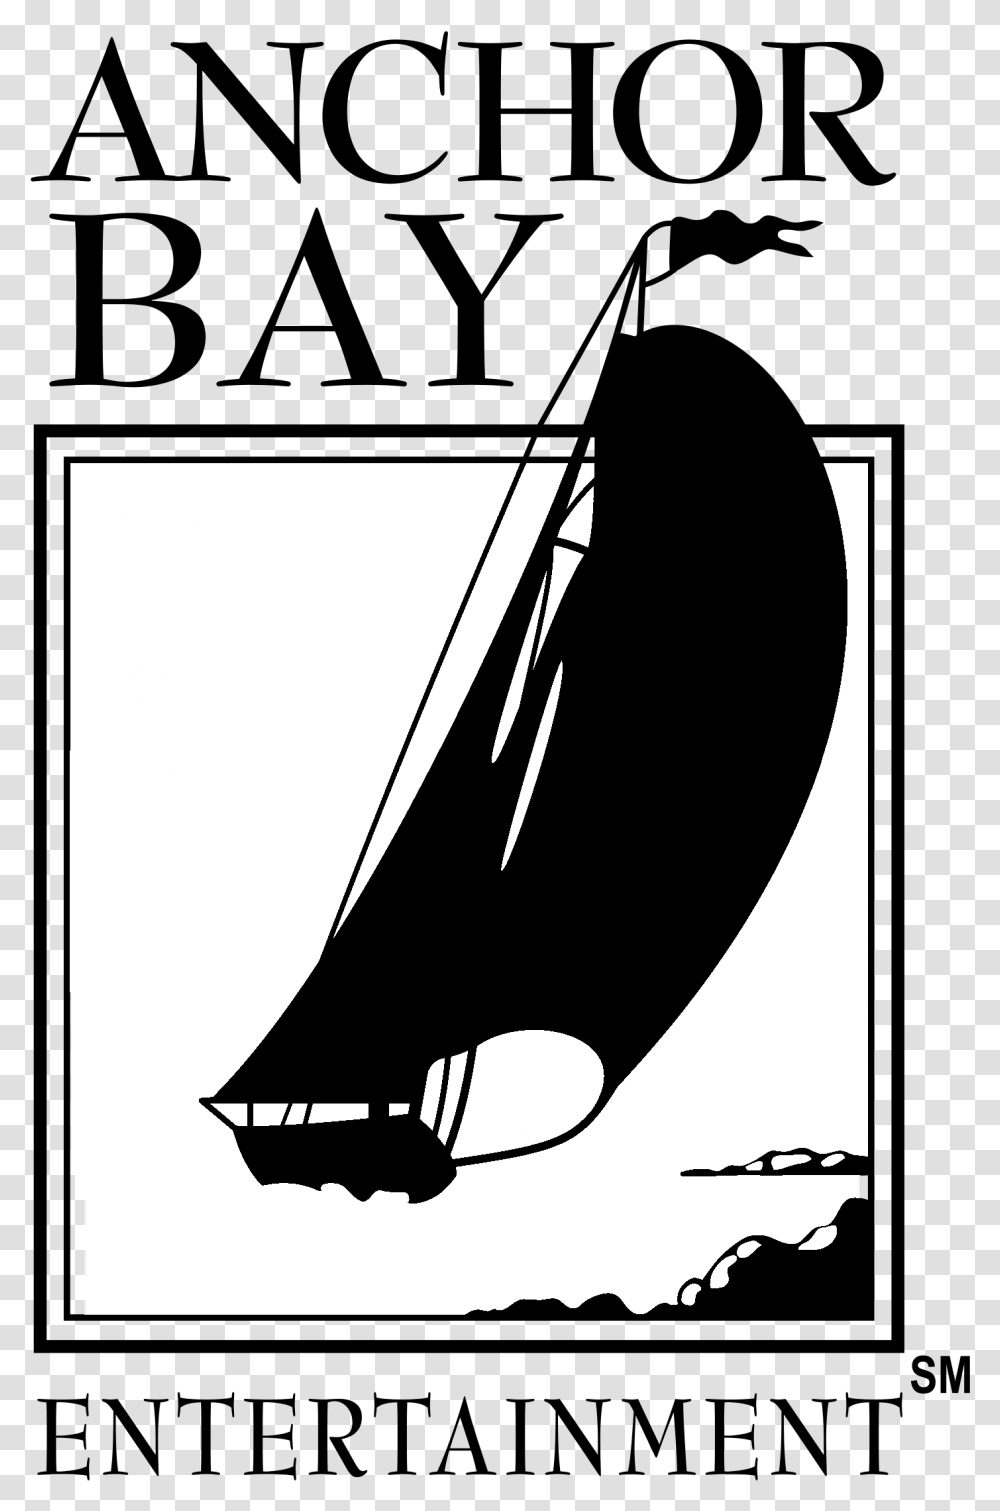 Anchor Bay Entertainment Logo Black And White Anchor Bay Entertainment, Building, Architecture, Stencil Transparent Png